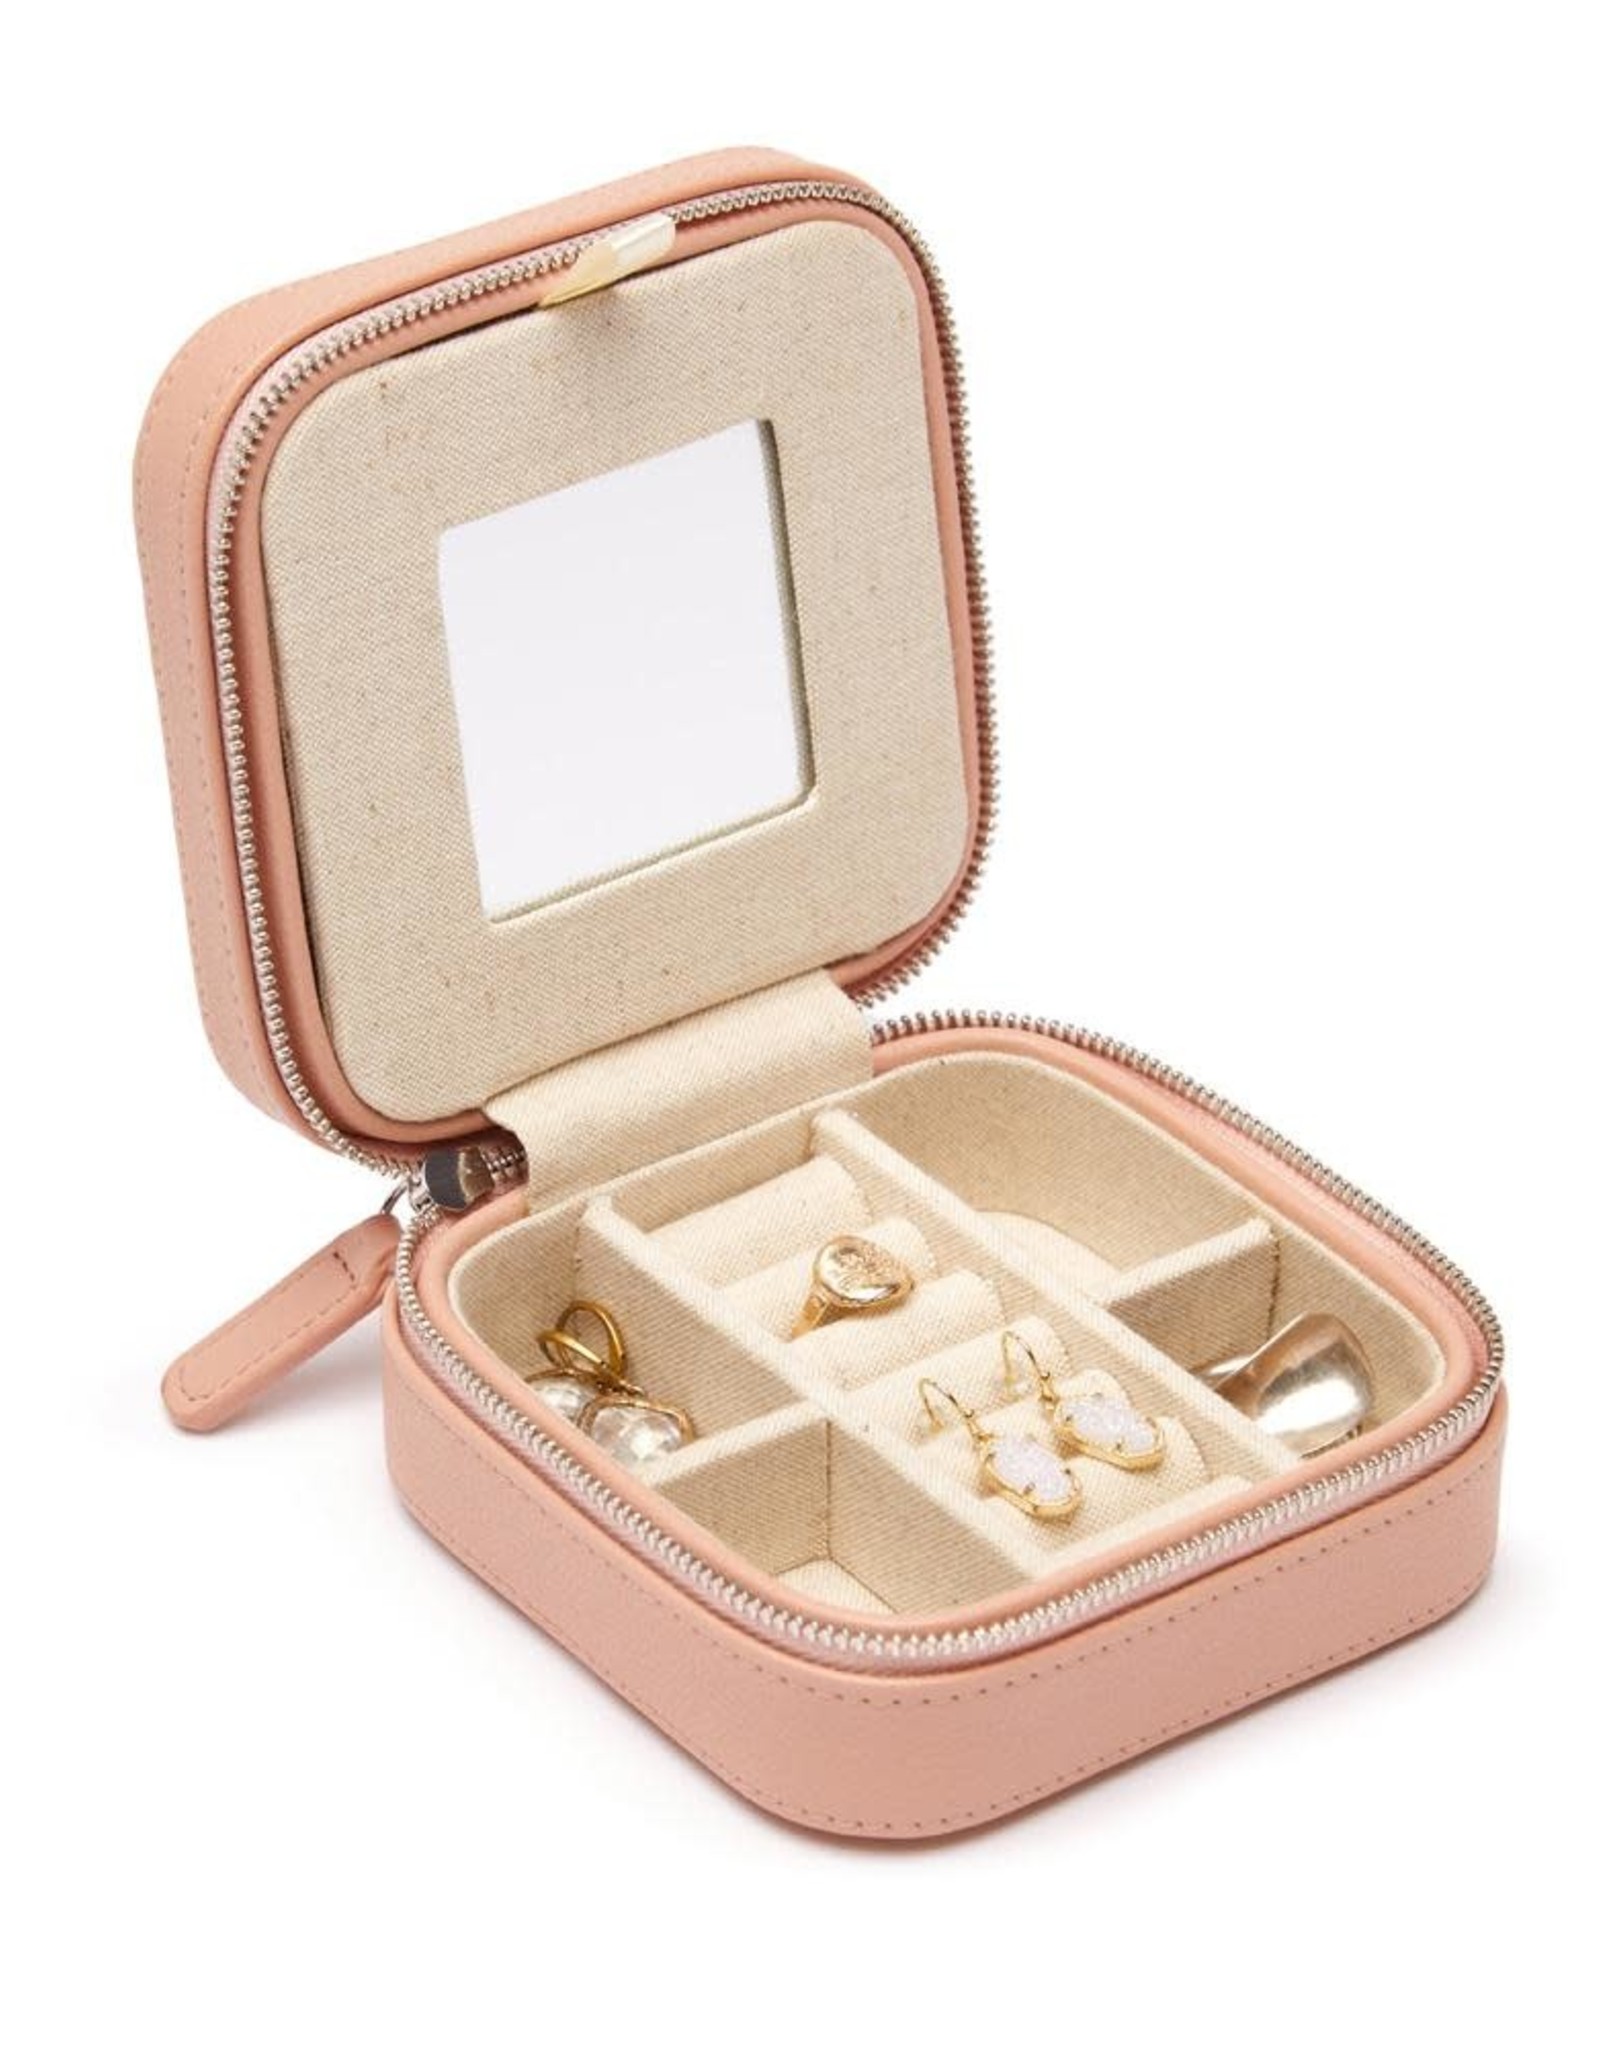 Brouk and Co. Luna Small Travel Jewelry Case